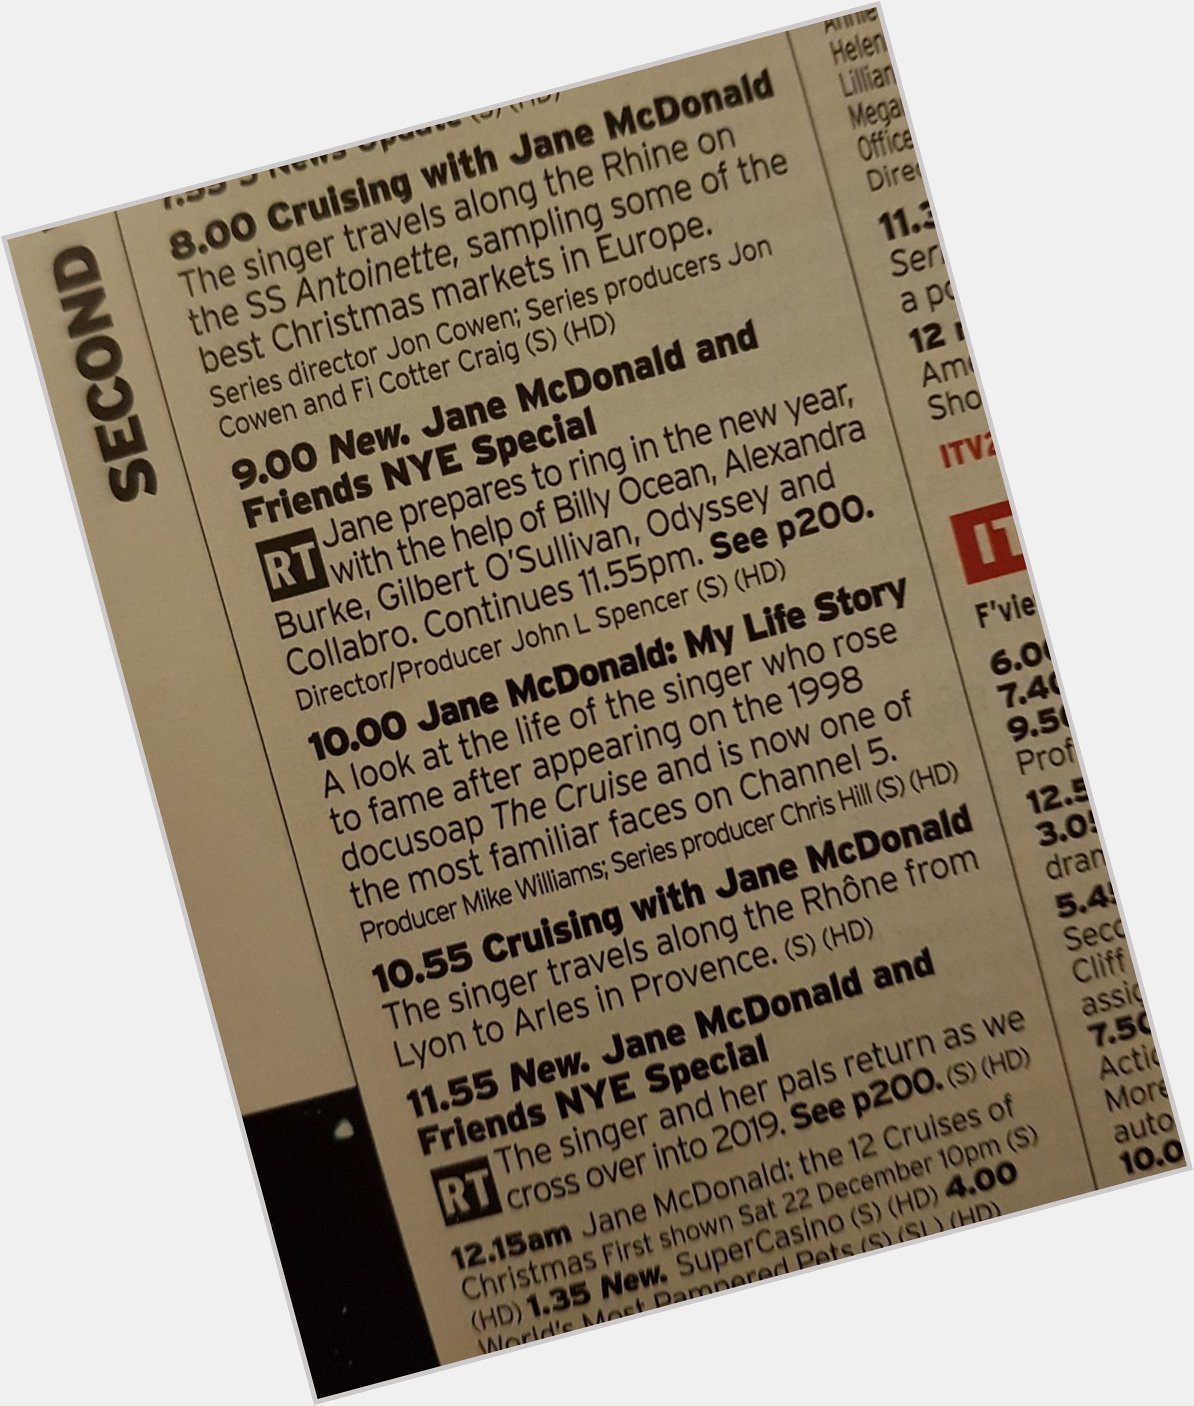 Happy 25th birthday to Channel 5. I\ll never forget the time you showed six Jane McDonald shows back to back. 